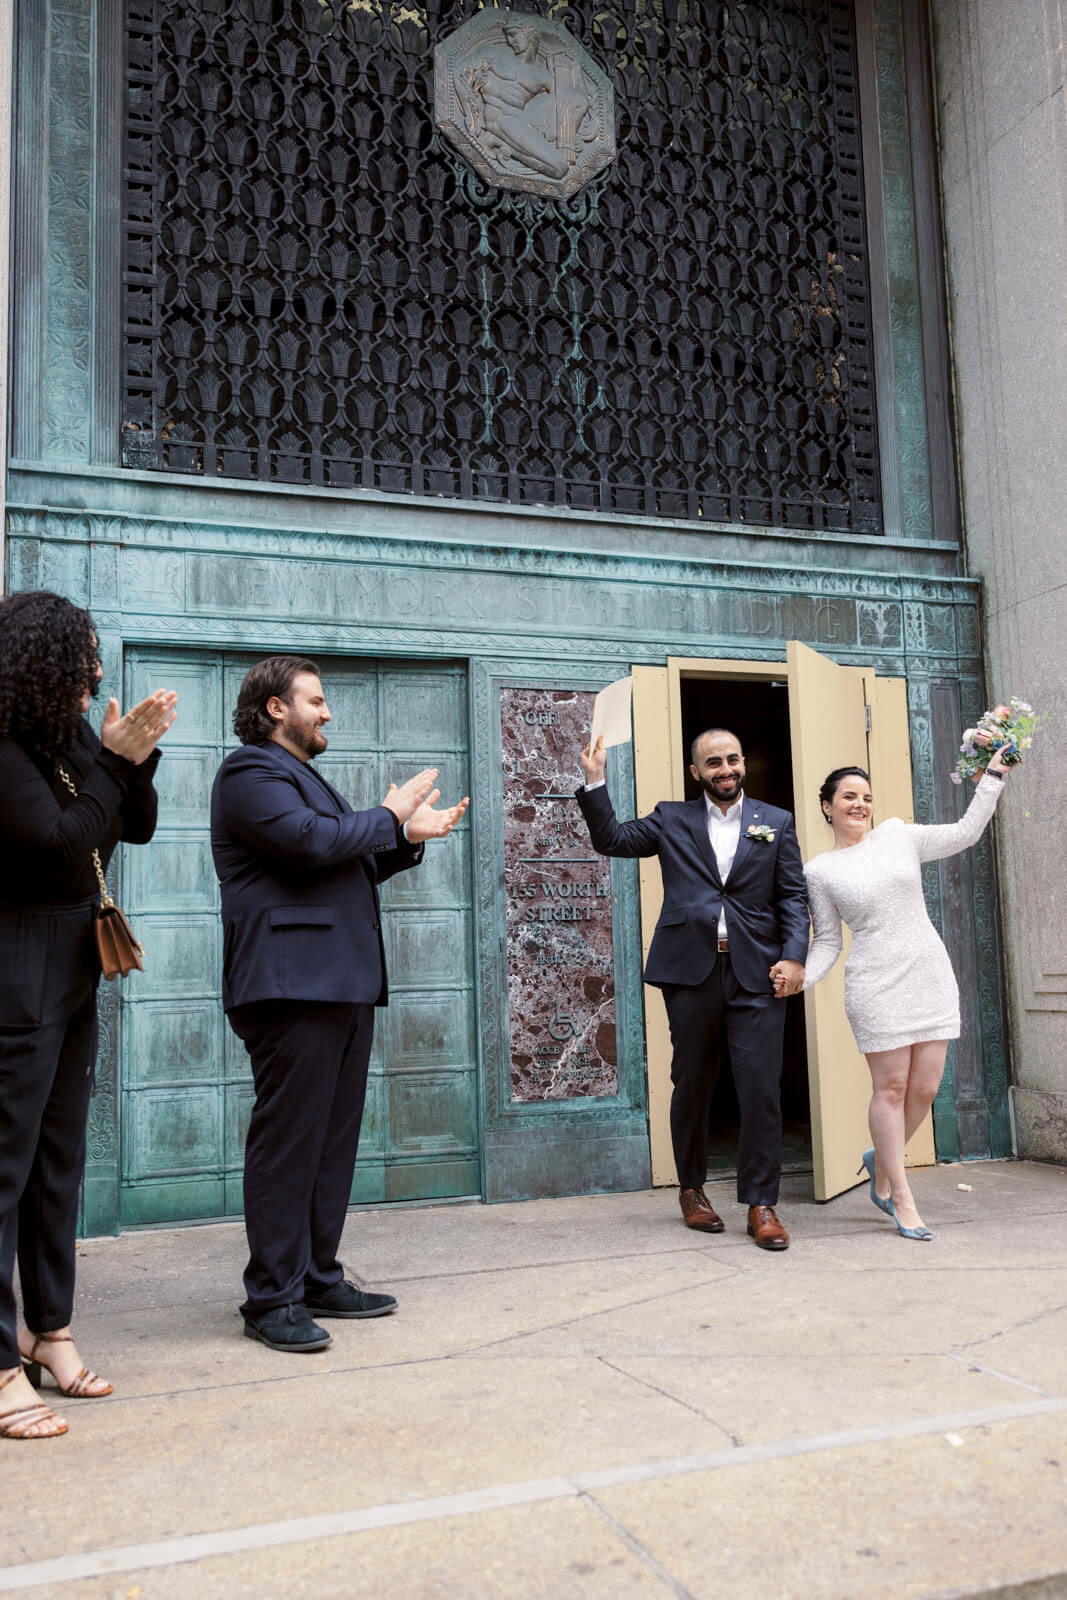 The bride and groom happily went out of the exit room in the City Clerk's Office. NY City Hall Elopement image by Jenny Fu Studio